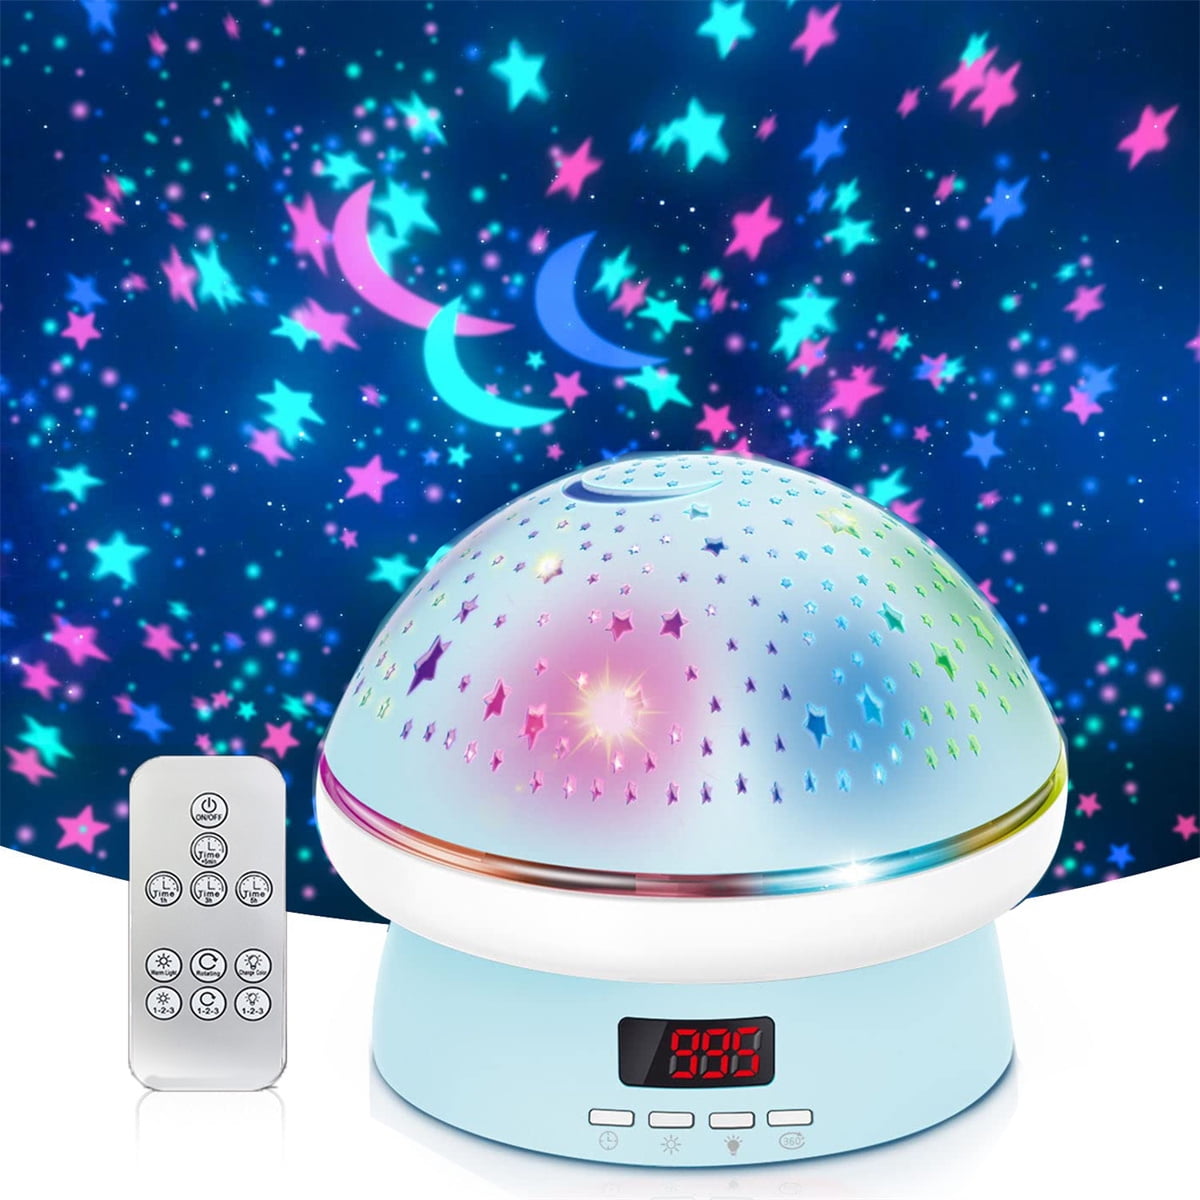 Galaxy Projector Light,GoLine Star Projector for Bedroom, Christmas  Birthday Gifts for Men Women Teen Girls Boys, Nebula Projector Night Light  with